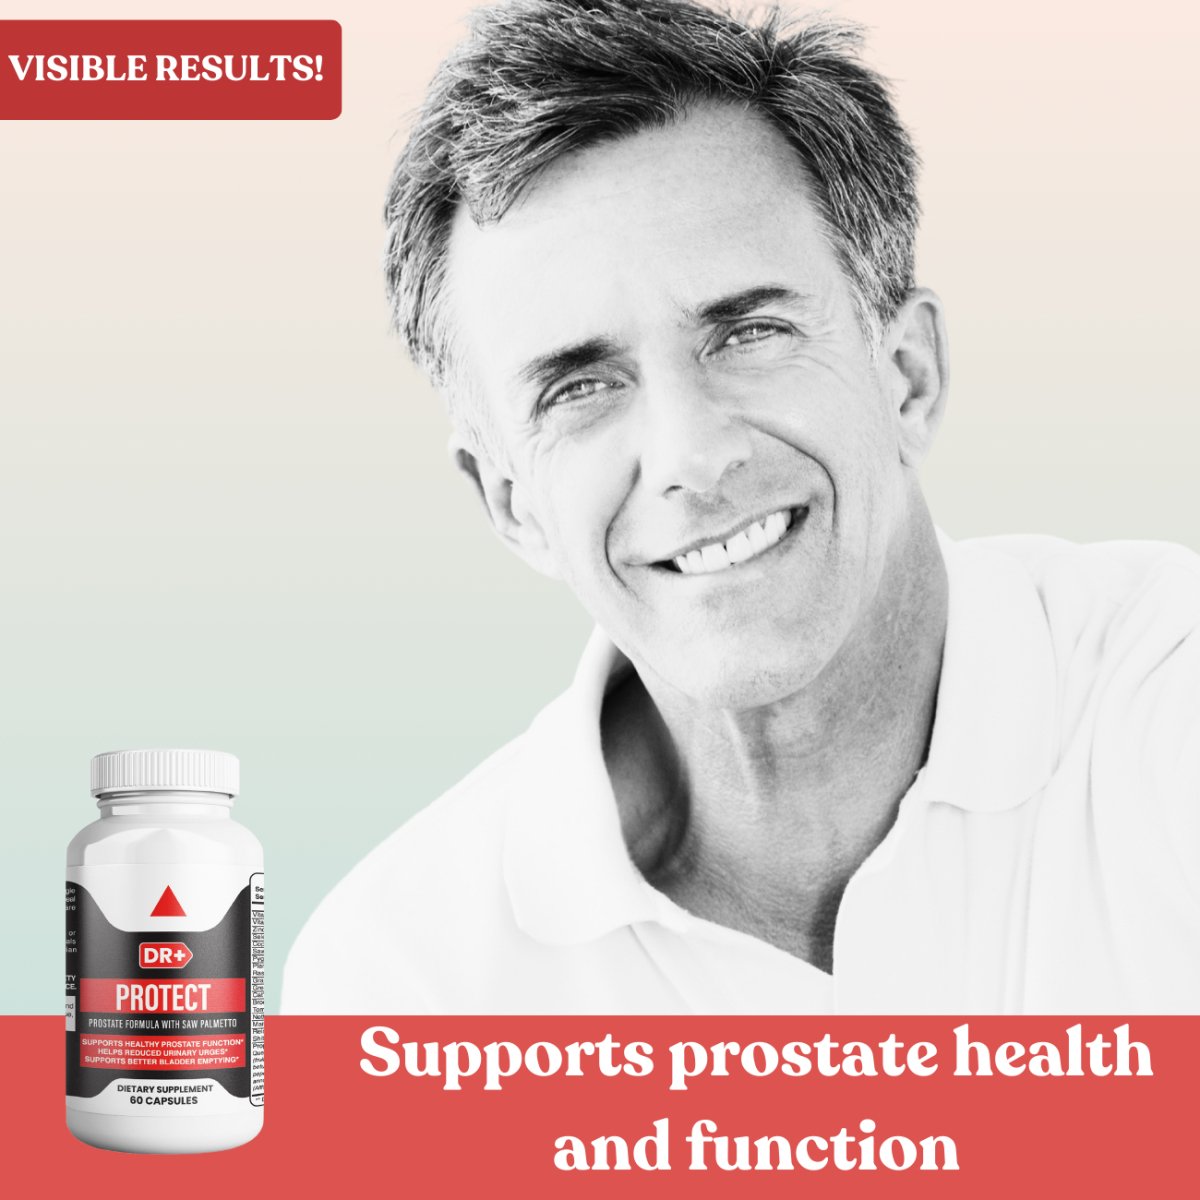 Prostate Support Supplement for Men's Health - Saw Palmetto, Pygeum, Beta Sitosterol, Lycopene - Bladder & Urinary Health | 6-Pack